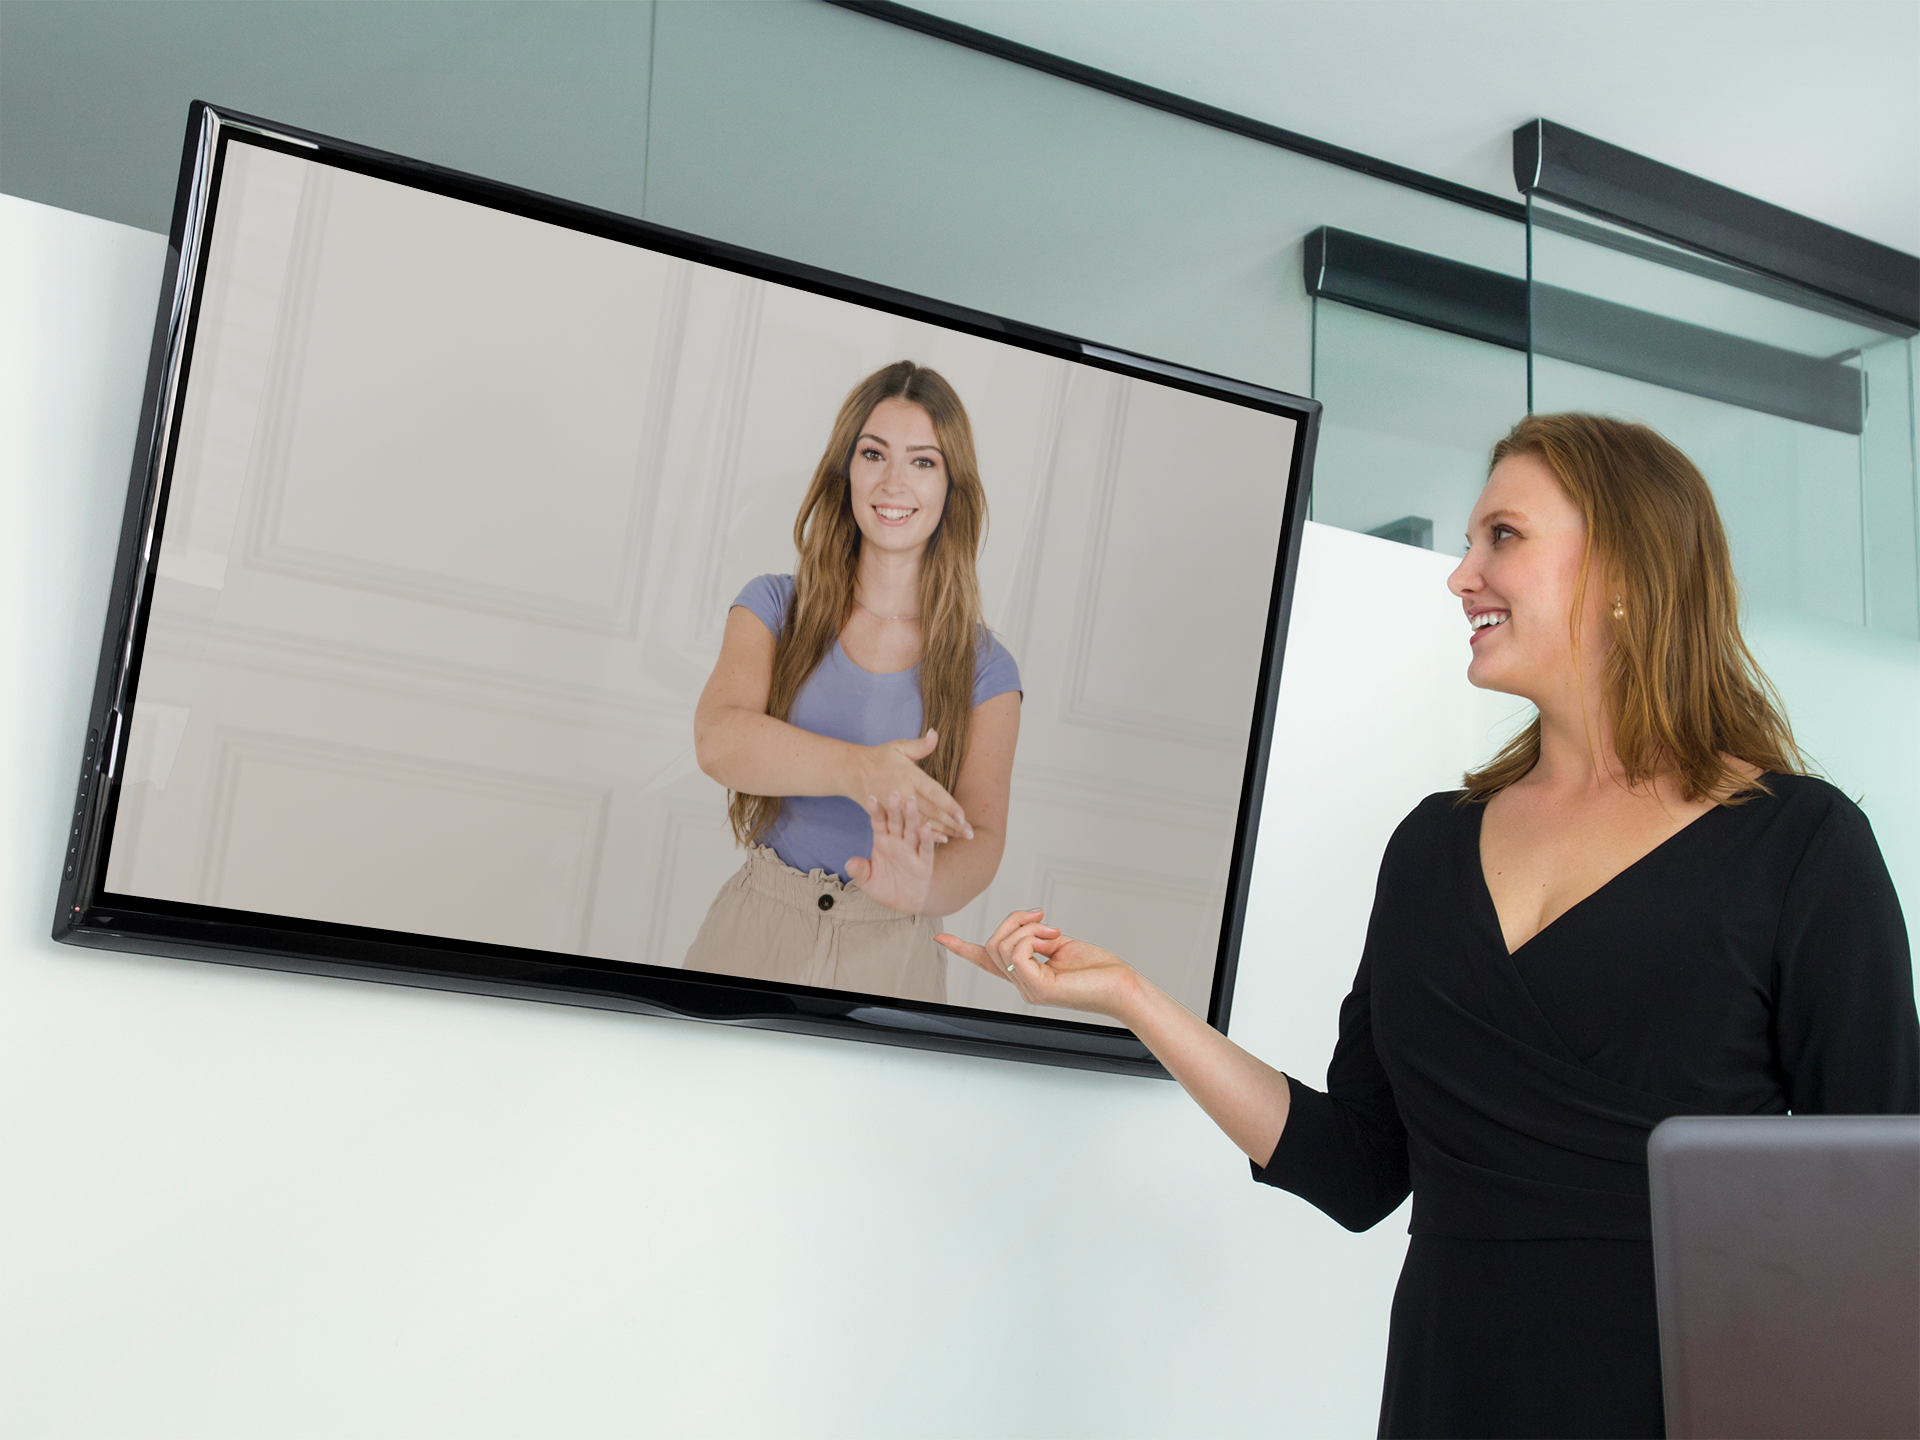 A woman points to a TV displaying a woman performing sign language